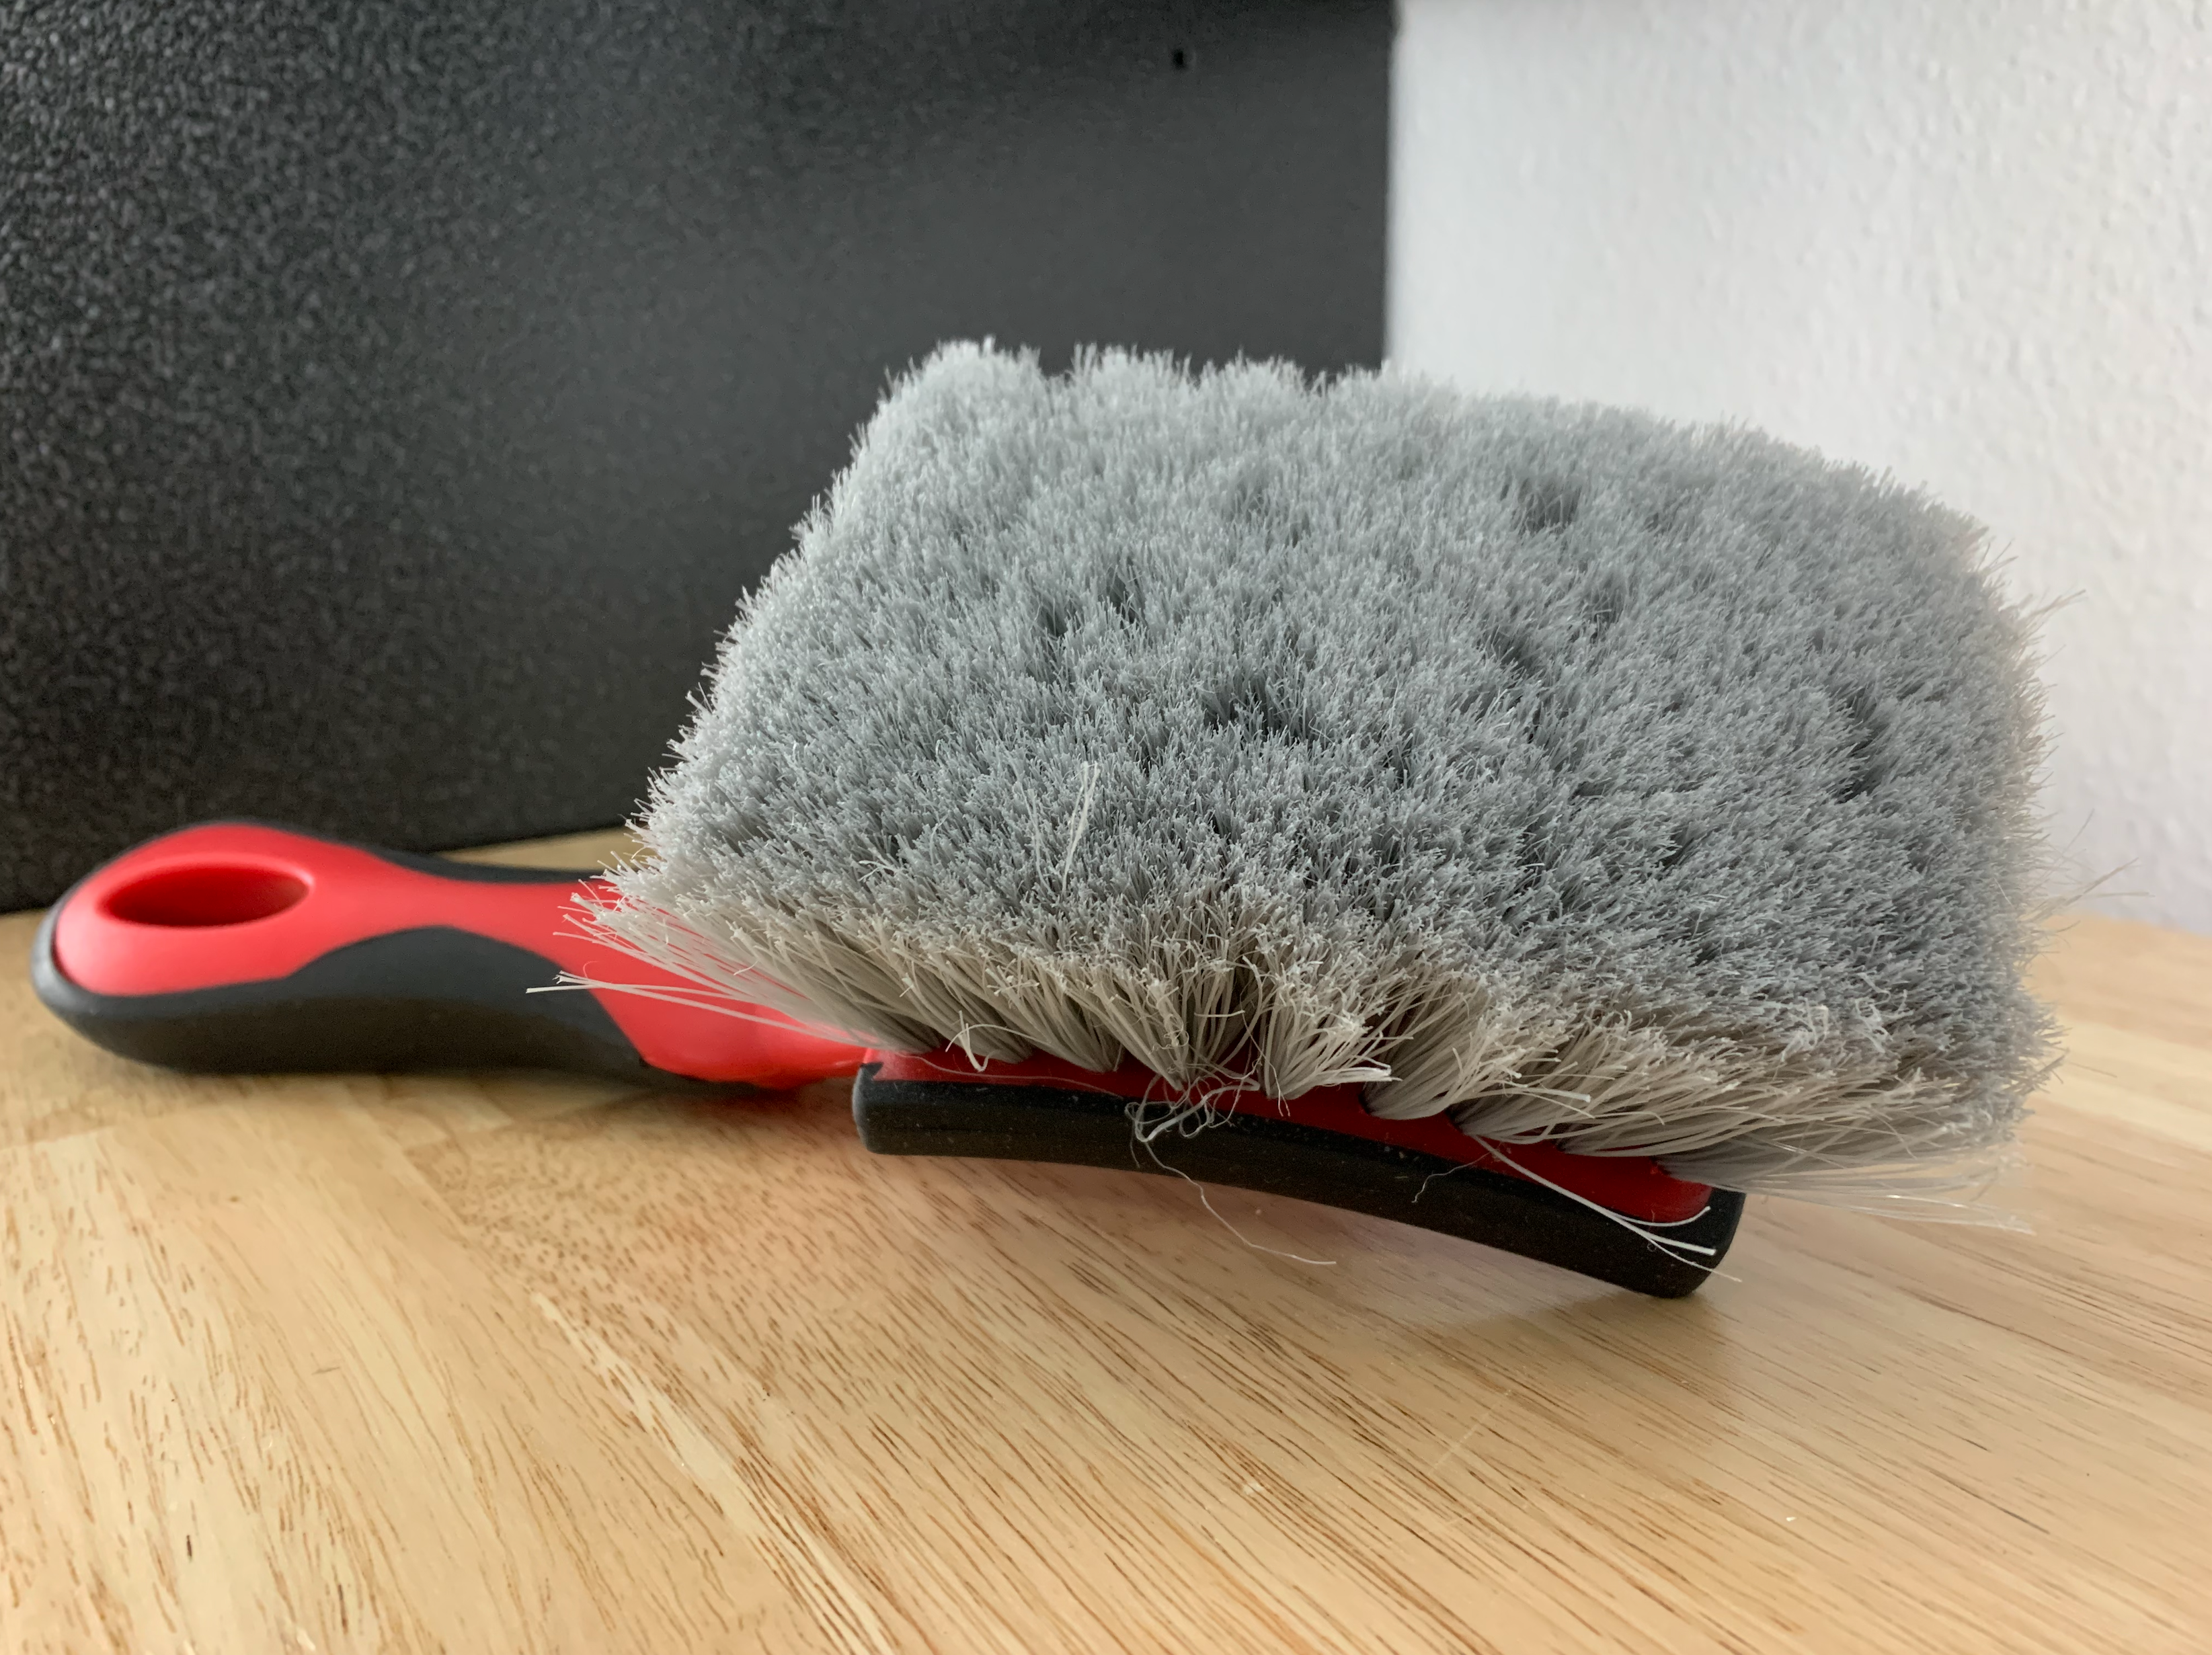 Wheel Well and Whitewall Cleaning Brush for Low-Profile Tires